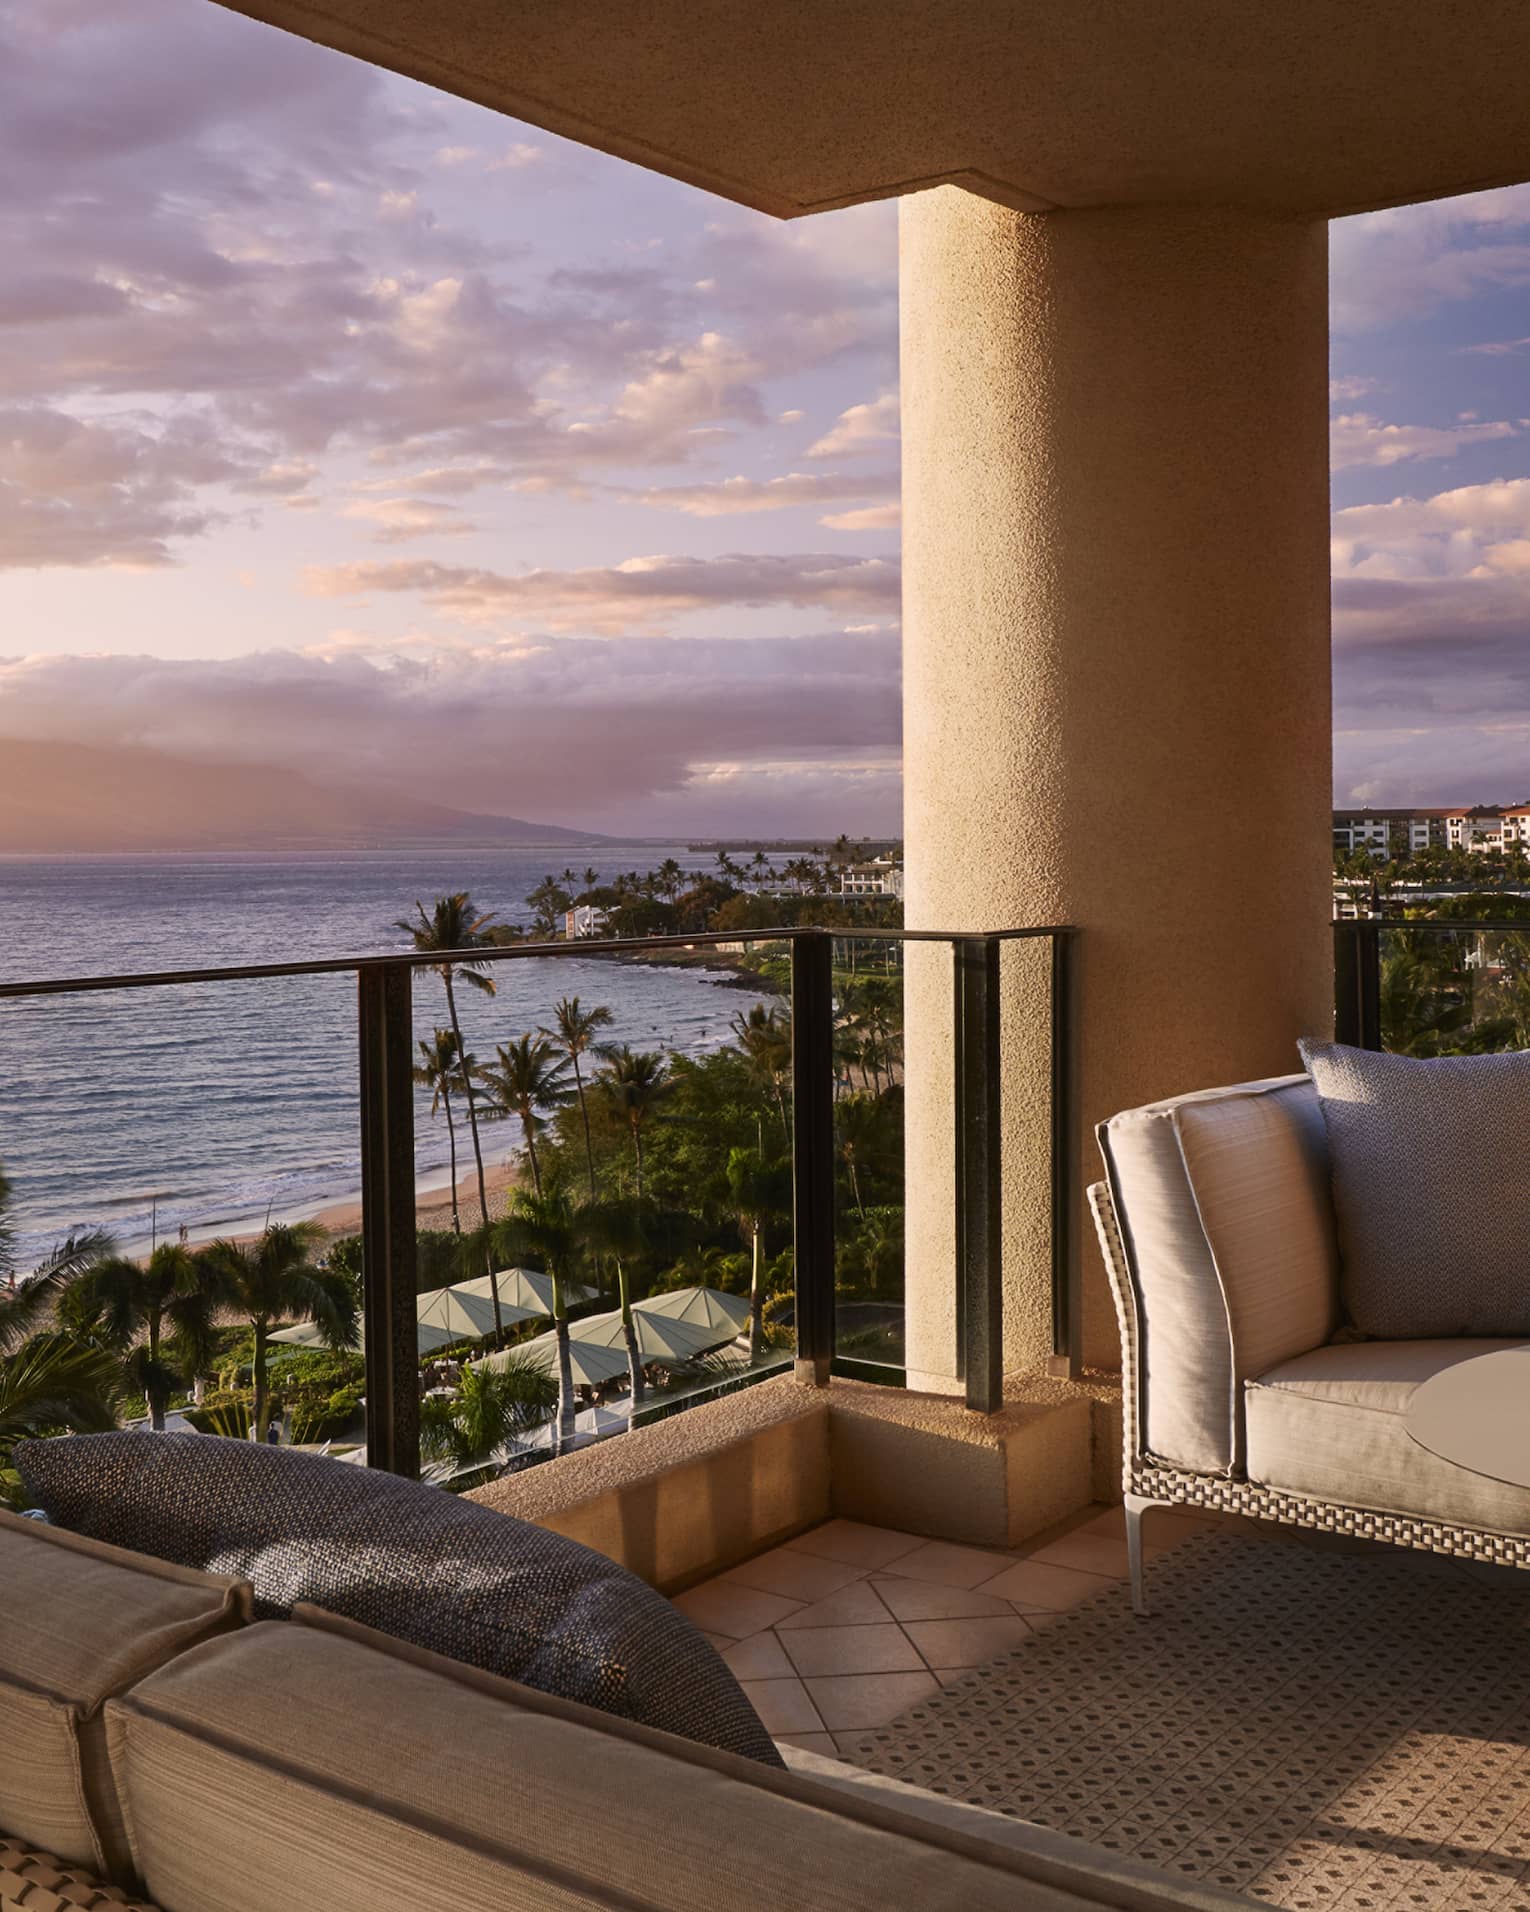 Balcony with wicker patio furniture, brown cushions in front of ocean view at sunset